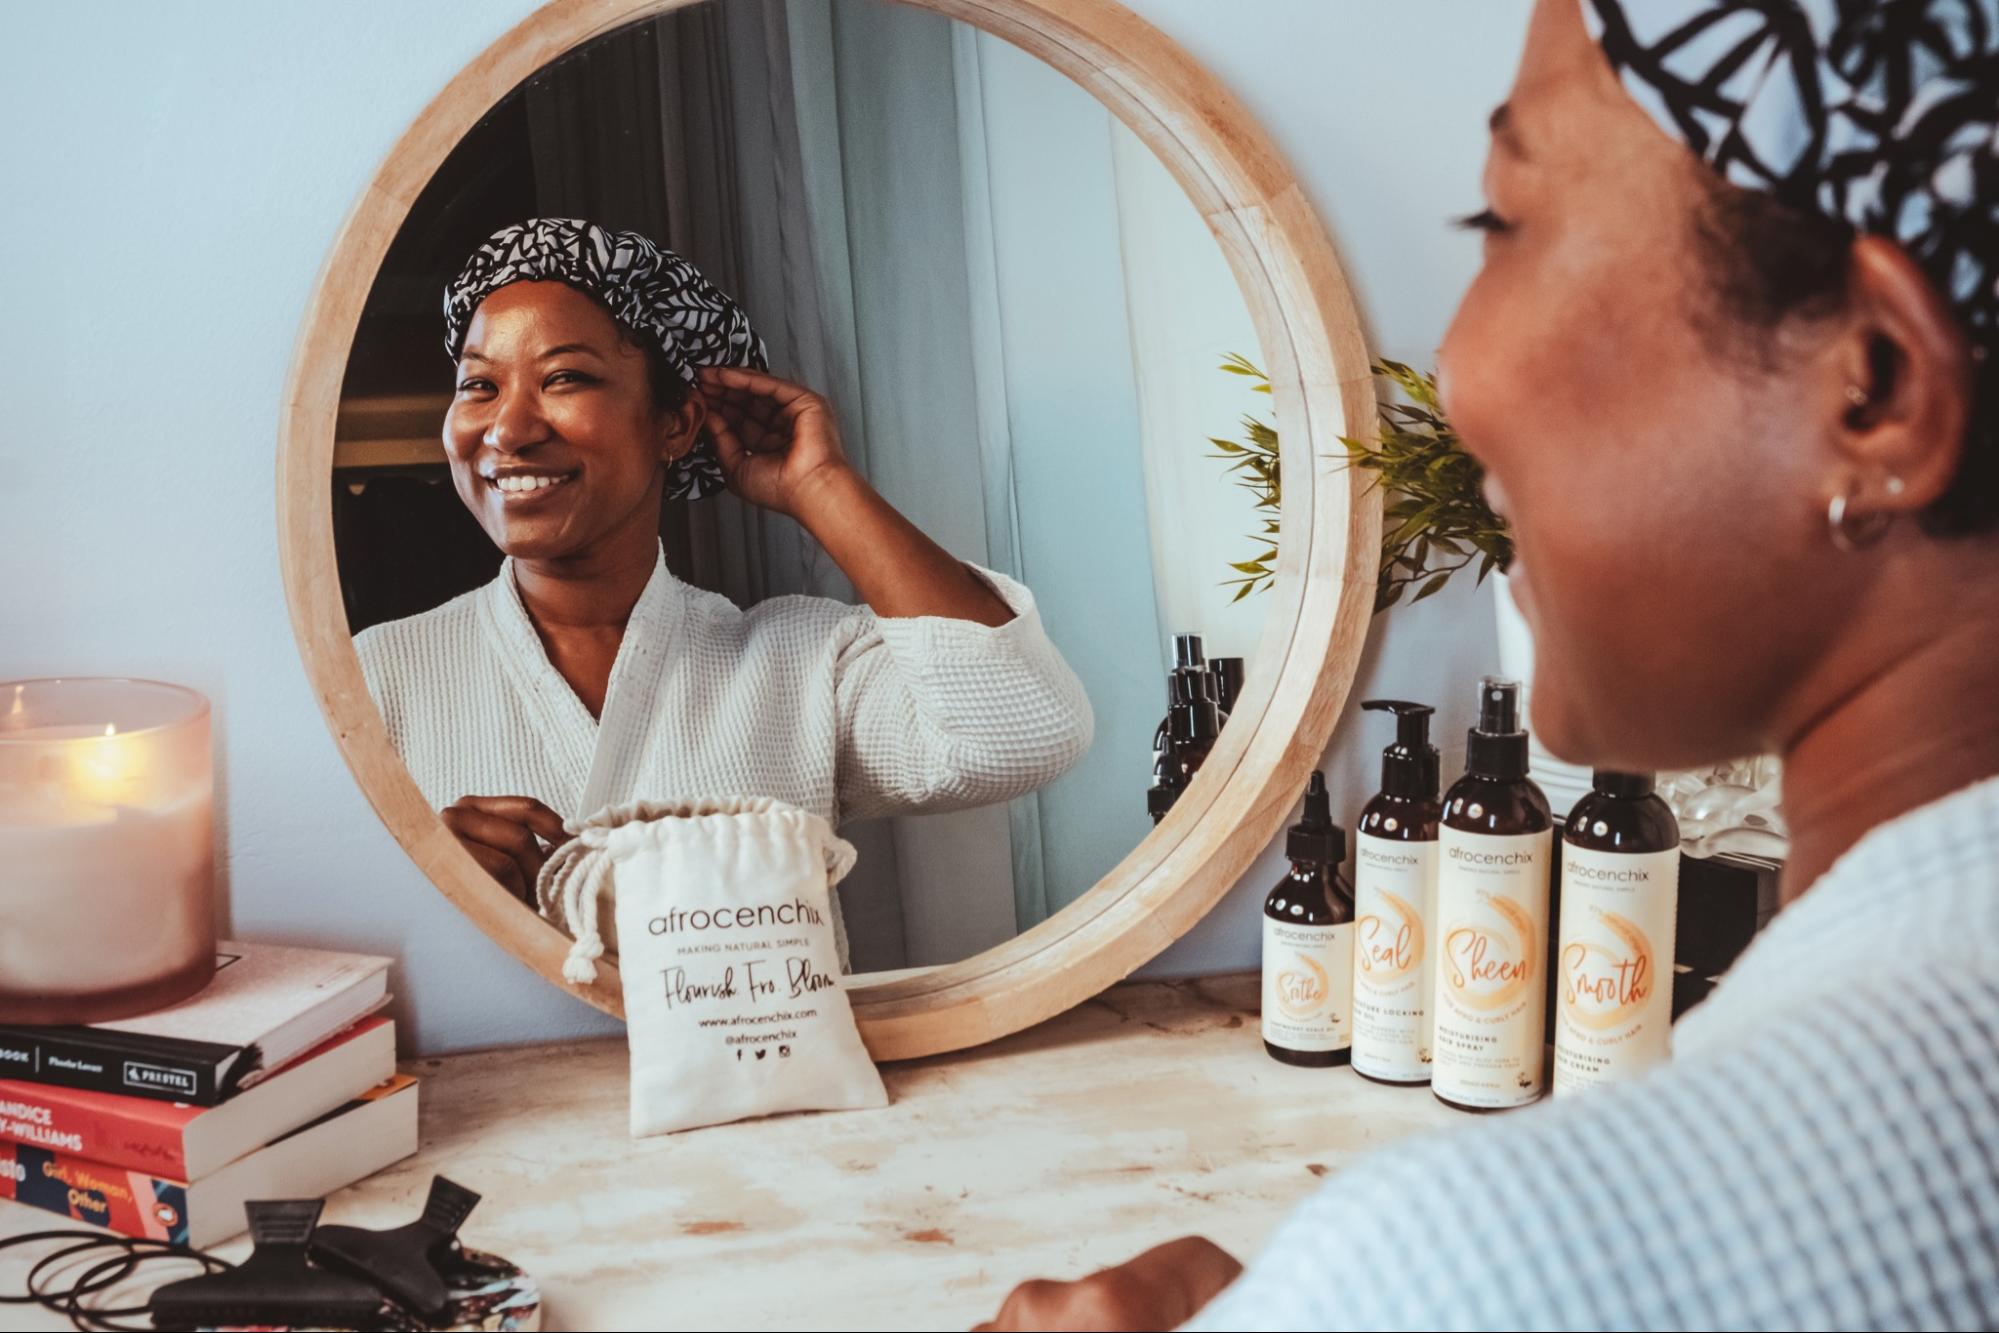 A model looks into the mirror while adjusting her bonnet from Afrocenchix, the table in front of her has products from Afrocenchix, books, and a candle. 